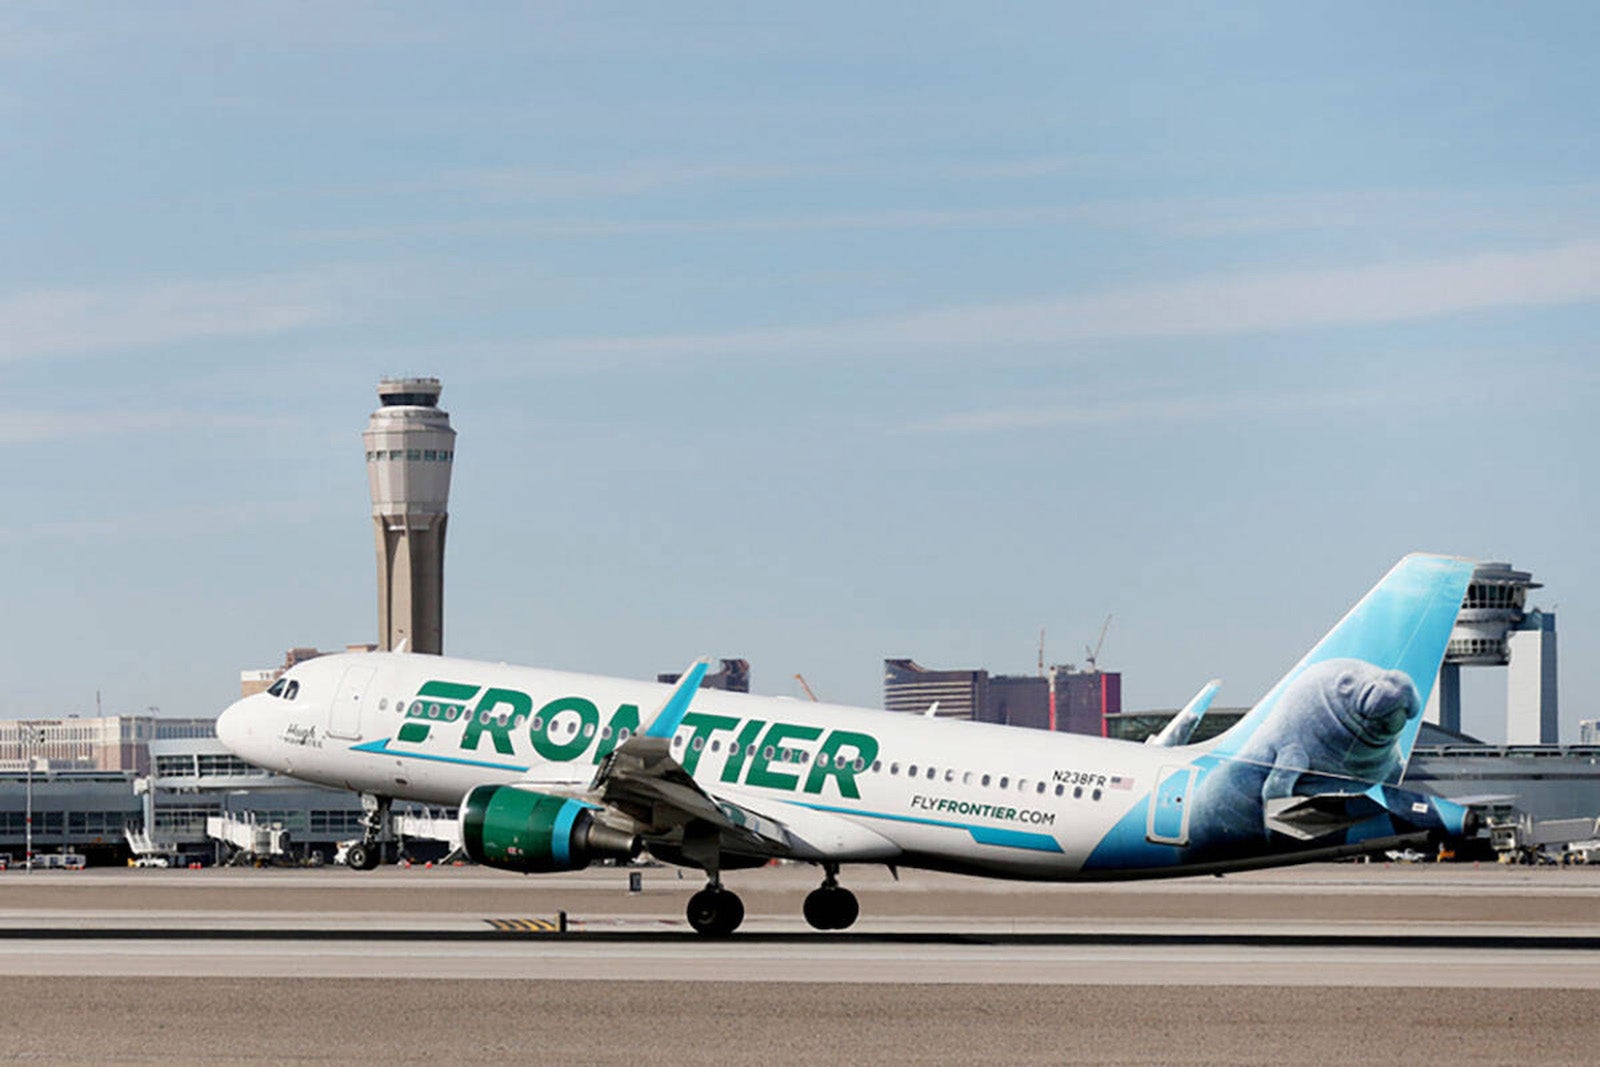 Exterior of a Frontier plane